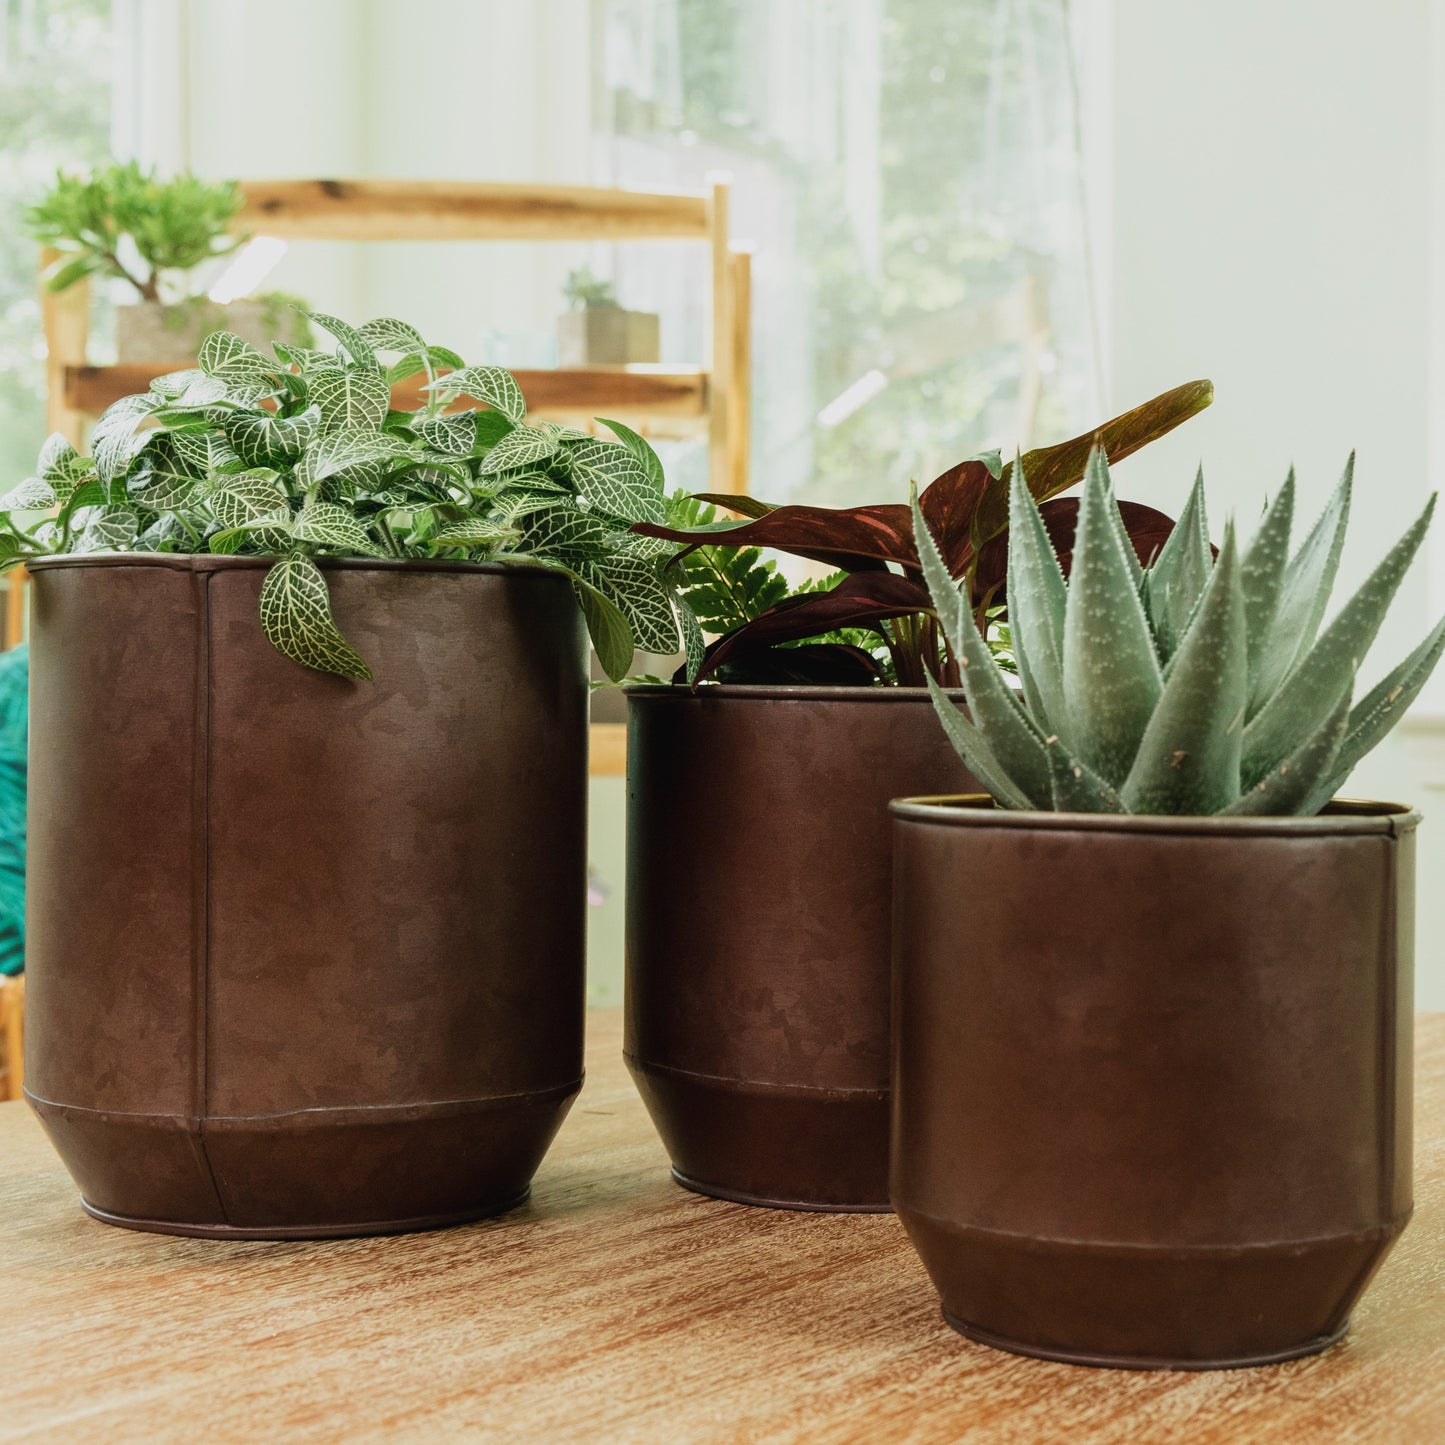 August Round Planters Set of 3